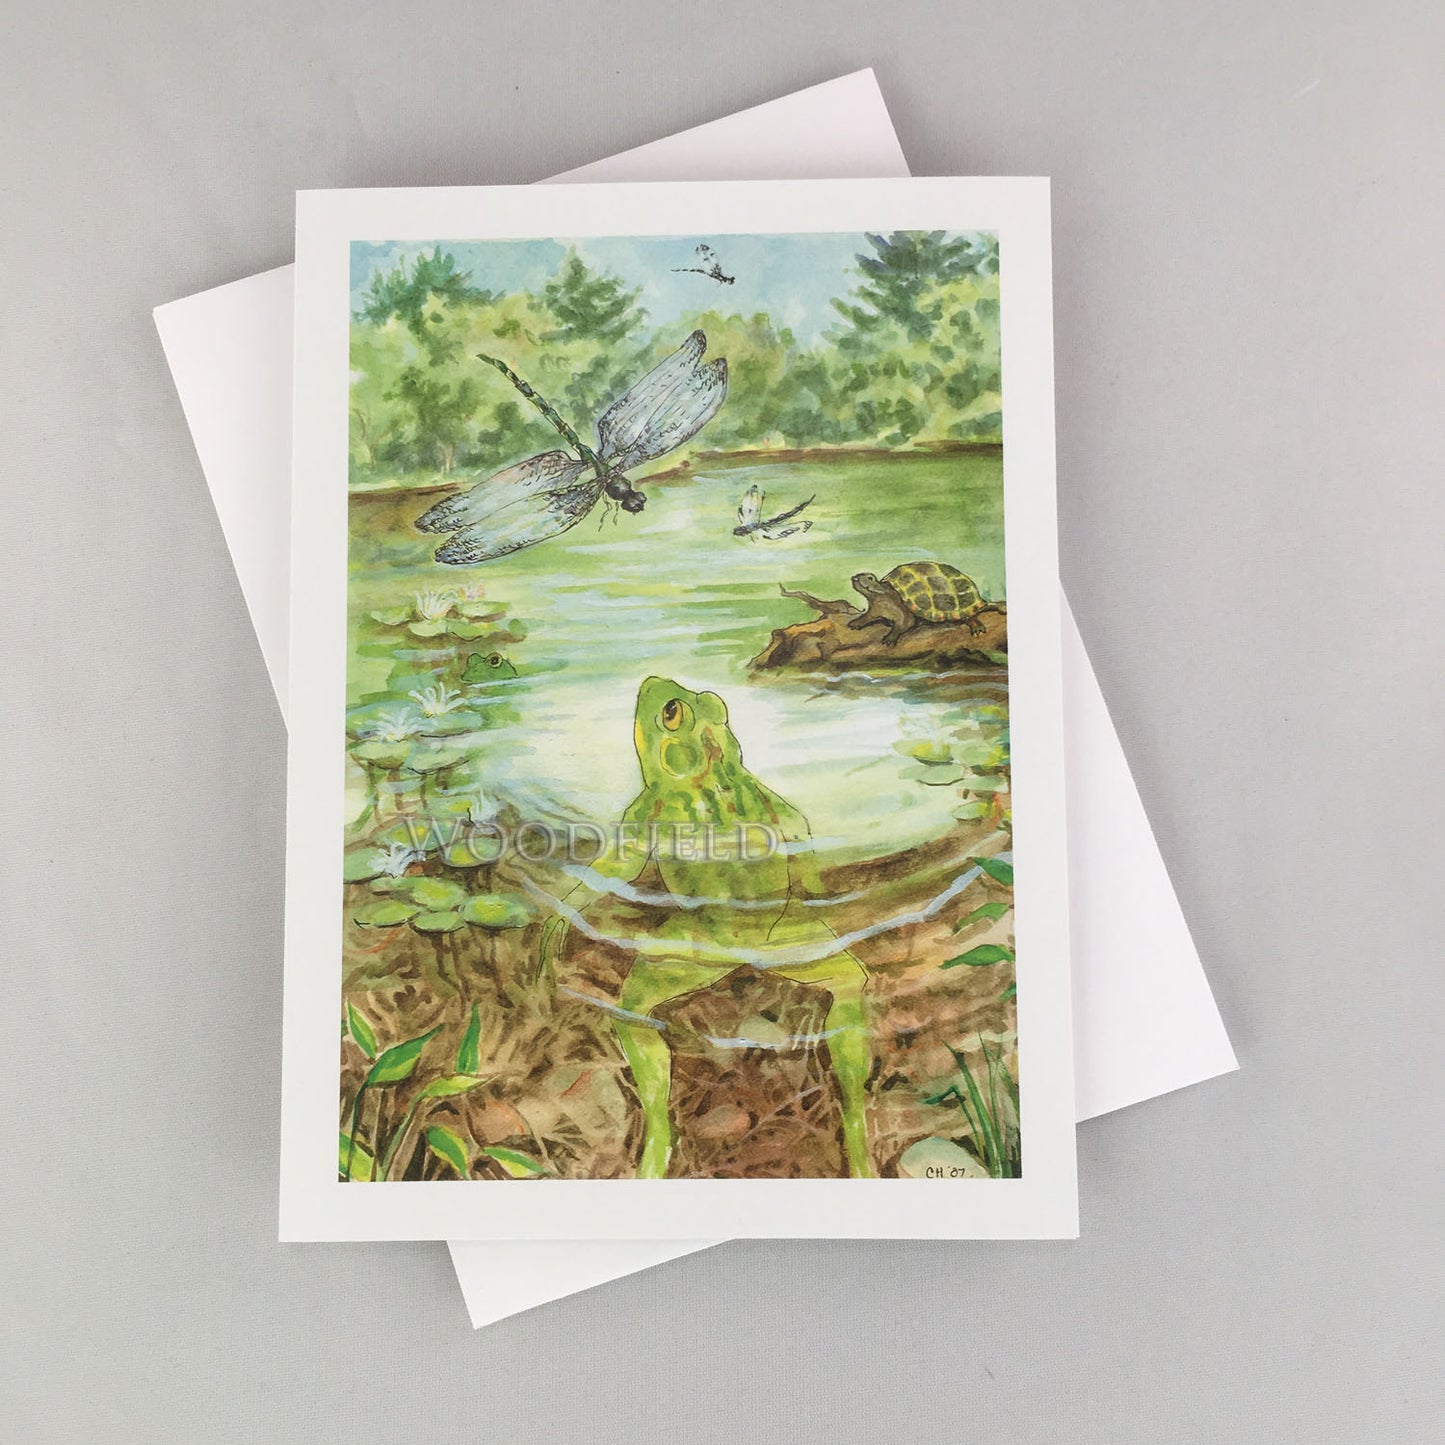 Lily Pond - Greeting Card by Woodfield Press